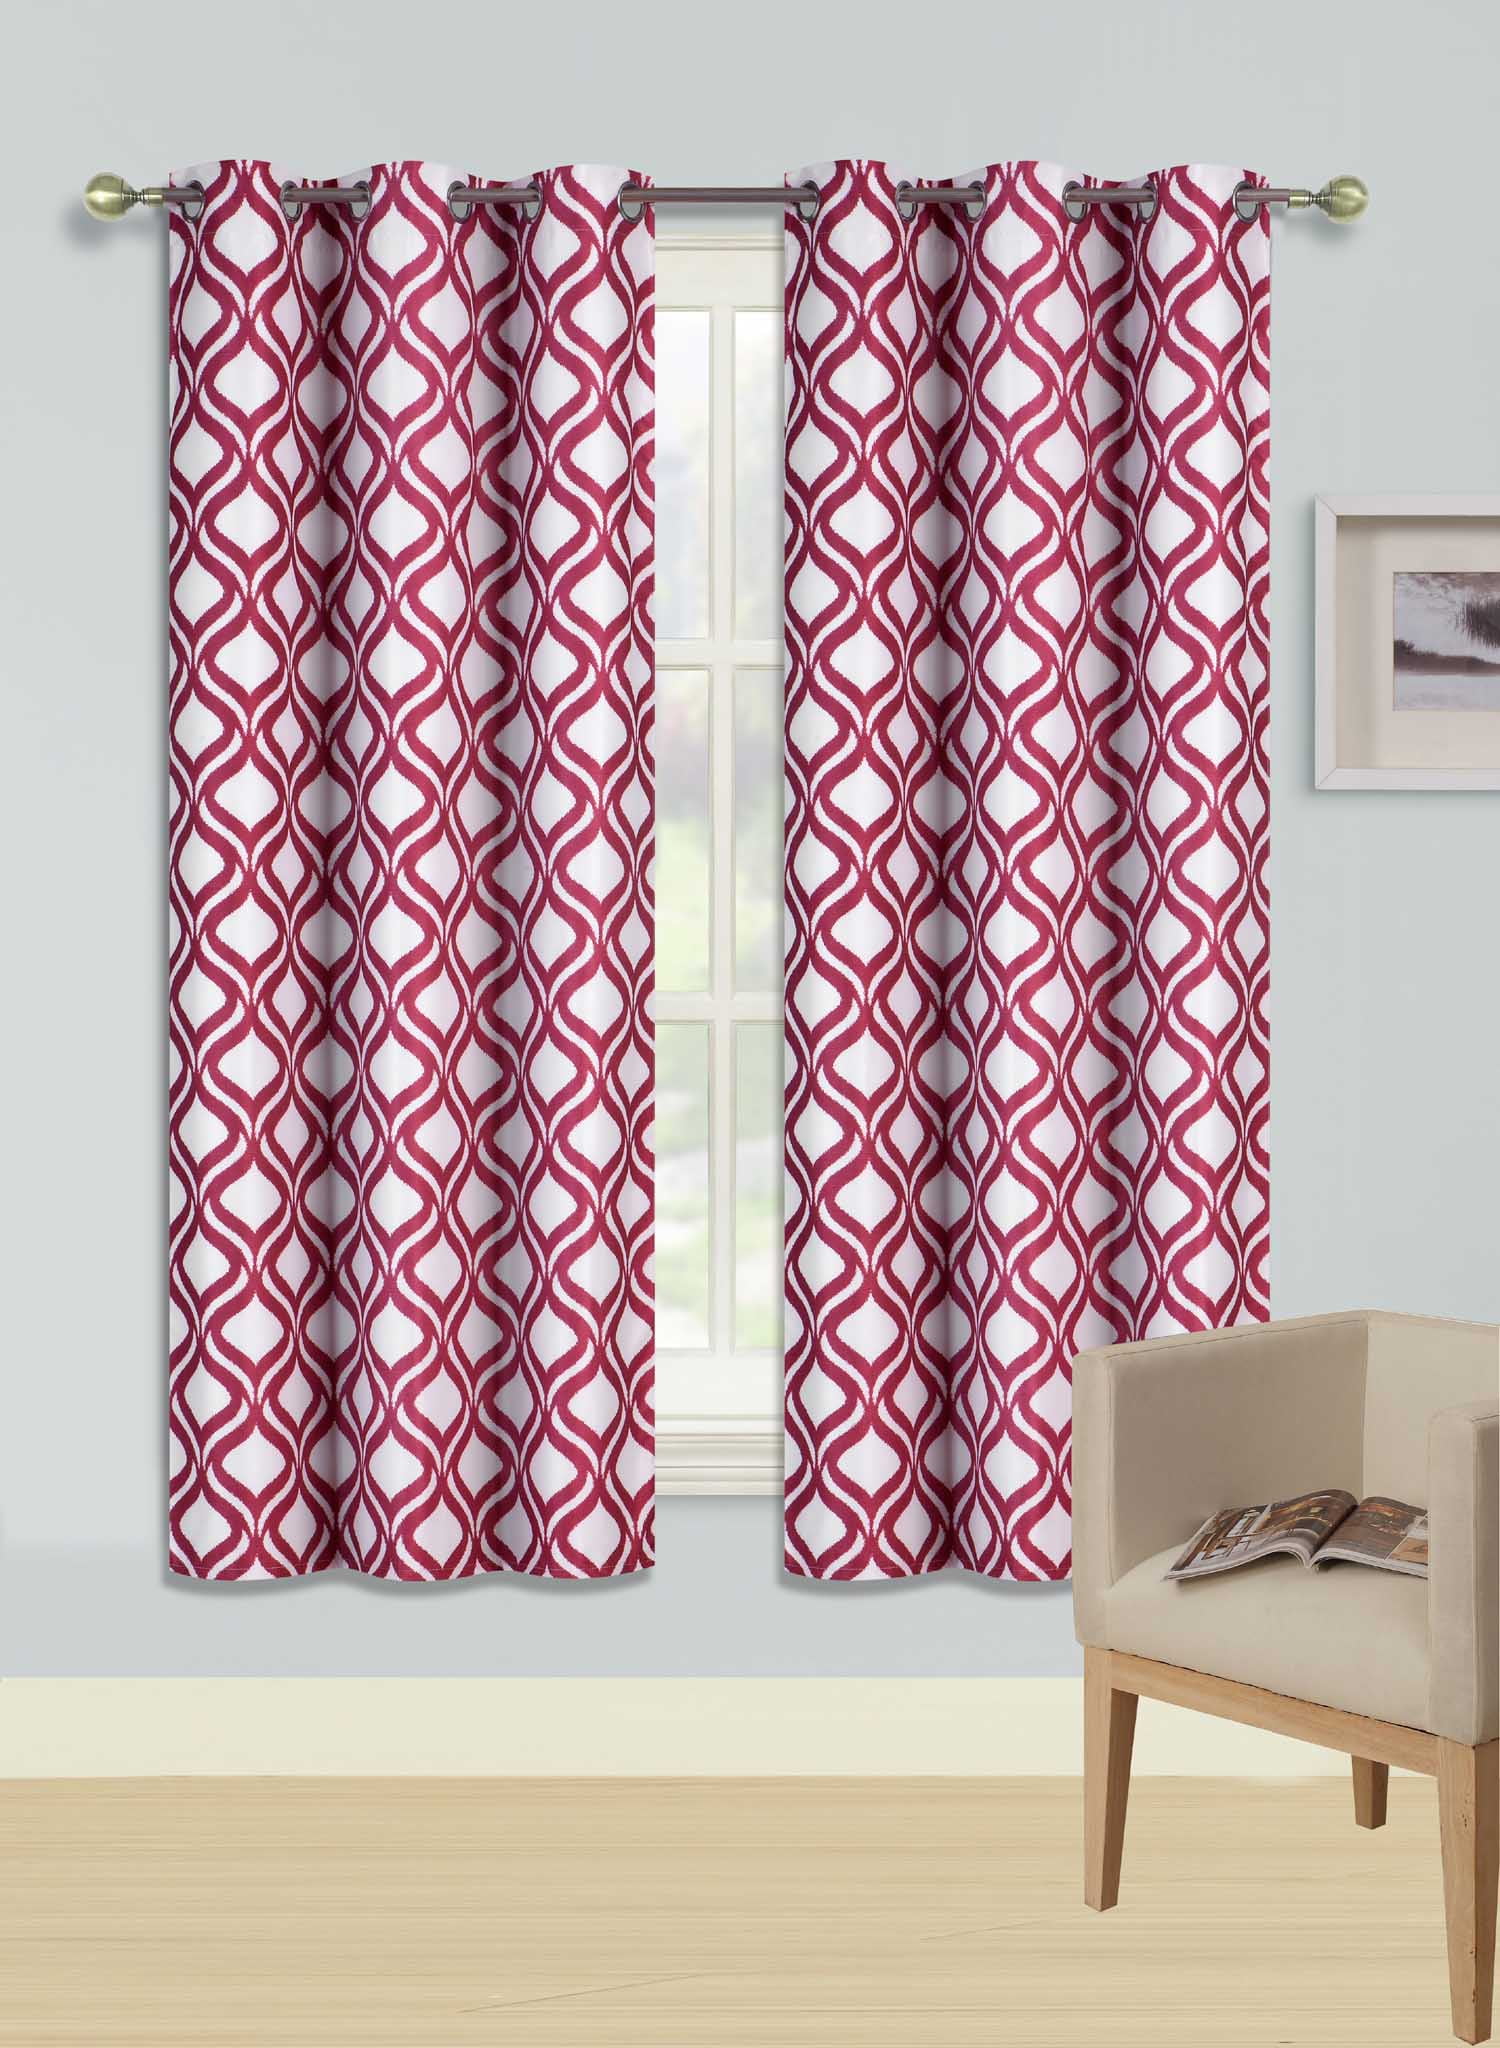 HIGH QUALITY WINDOW CURTAIN BLACKOUT ROOM DARKENING IN 63" 84" L 1PC FLORAL 